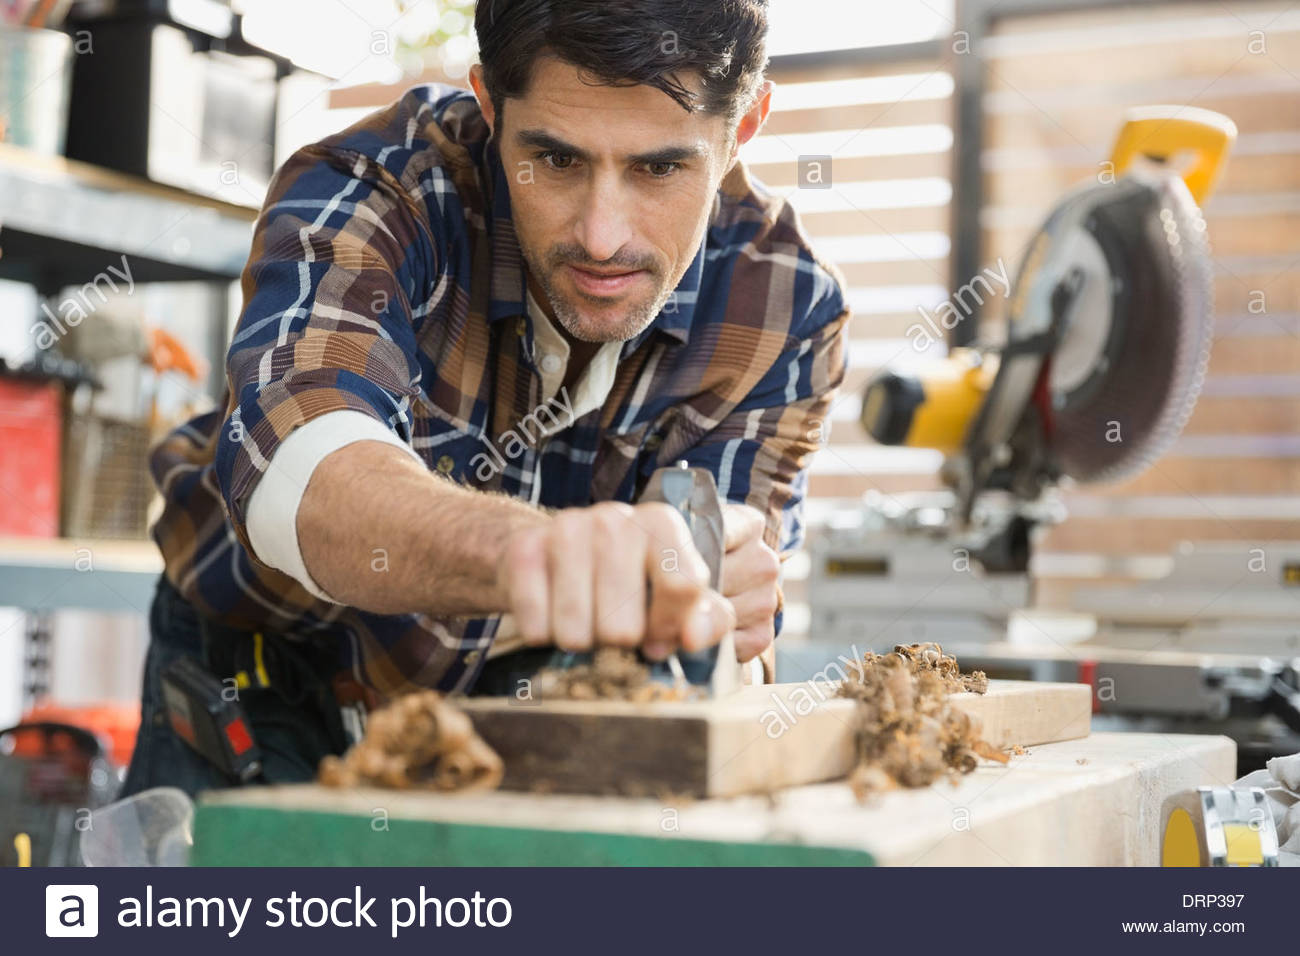 Carpenter smoothing wood with plane in workshop Stock Photo